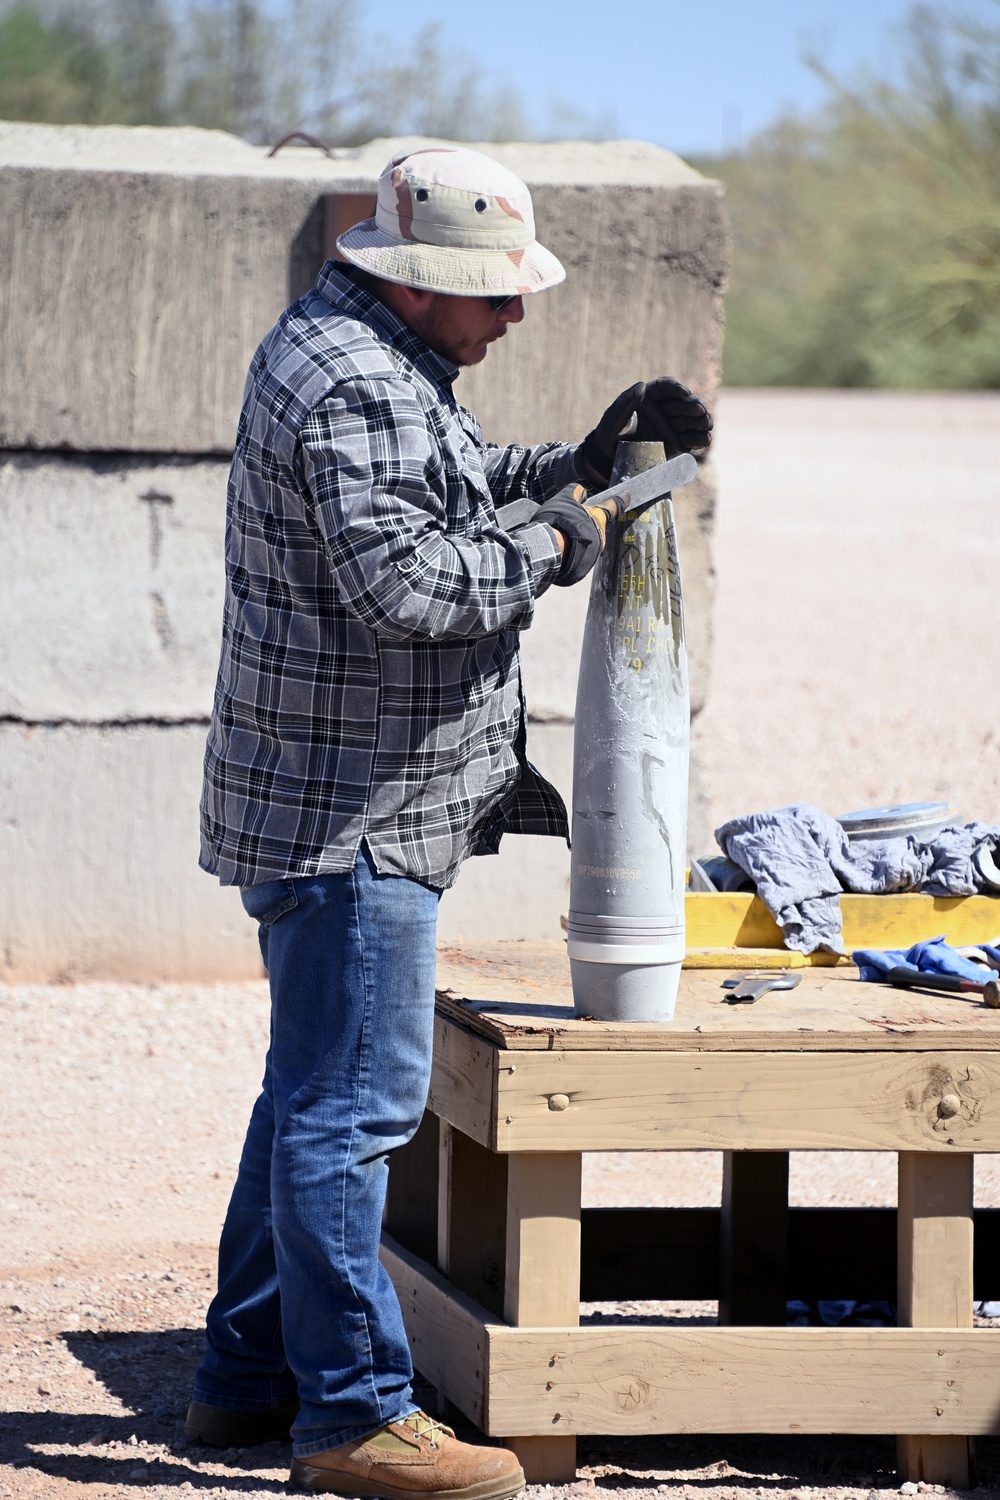 Yuma Proving Ground ensures the reliability of munitions